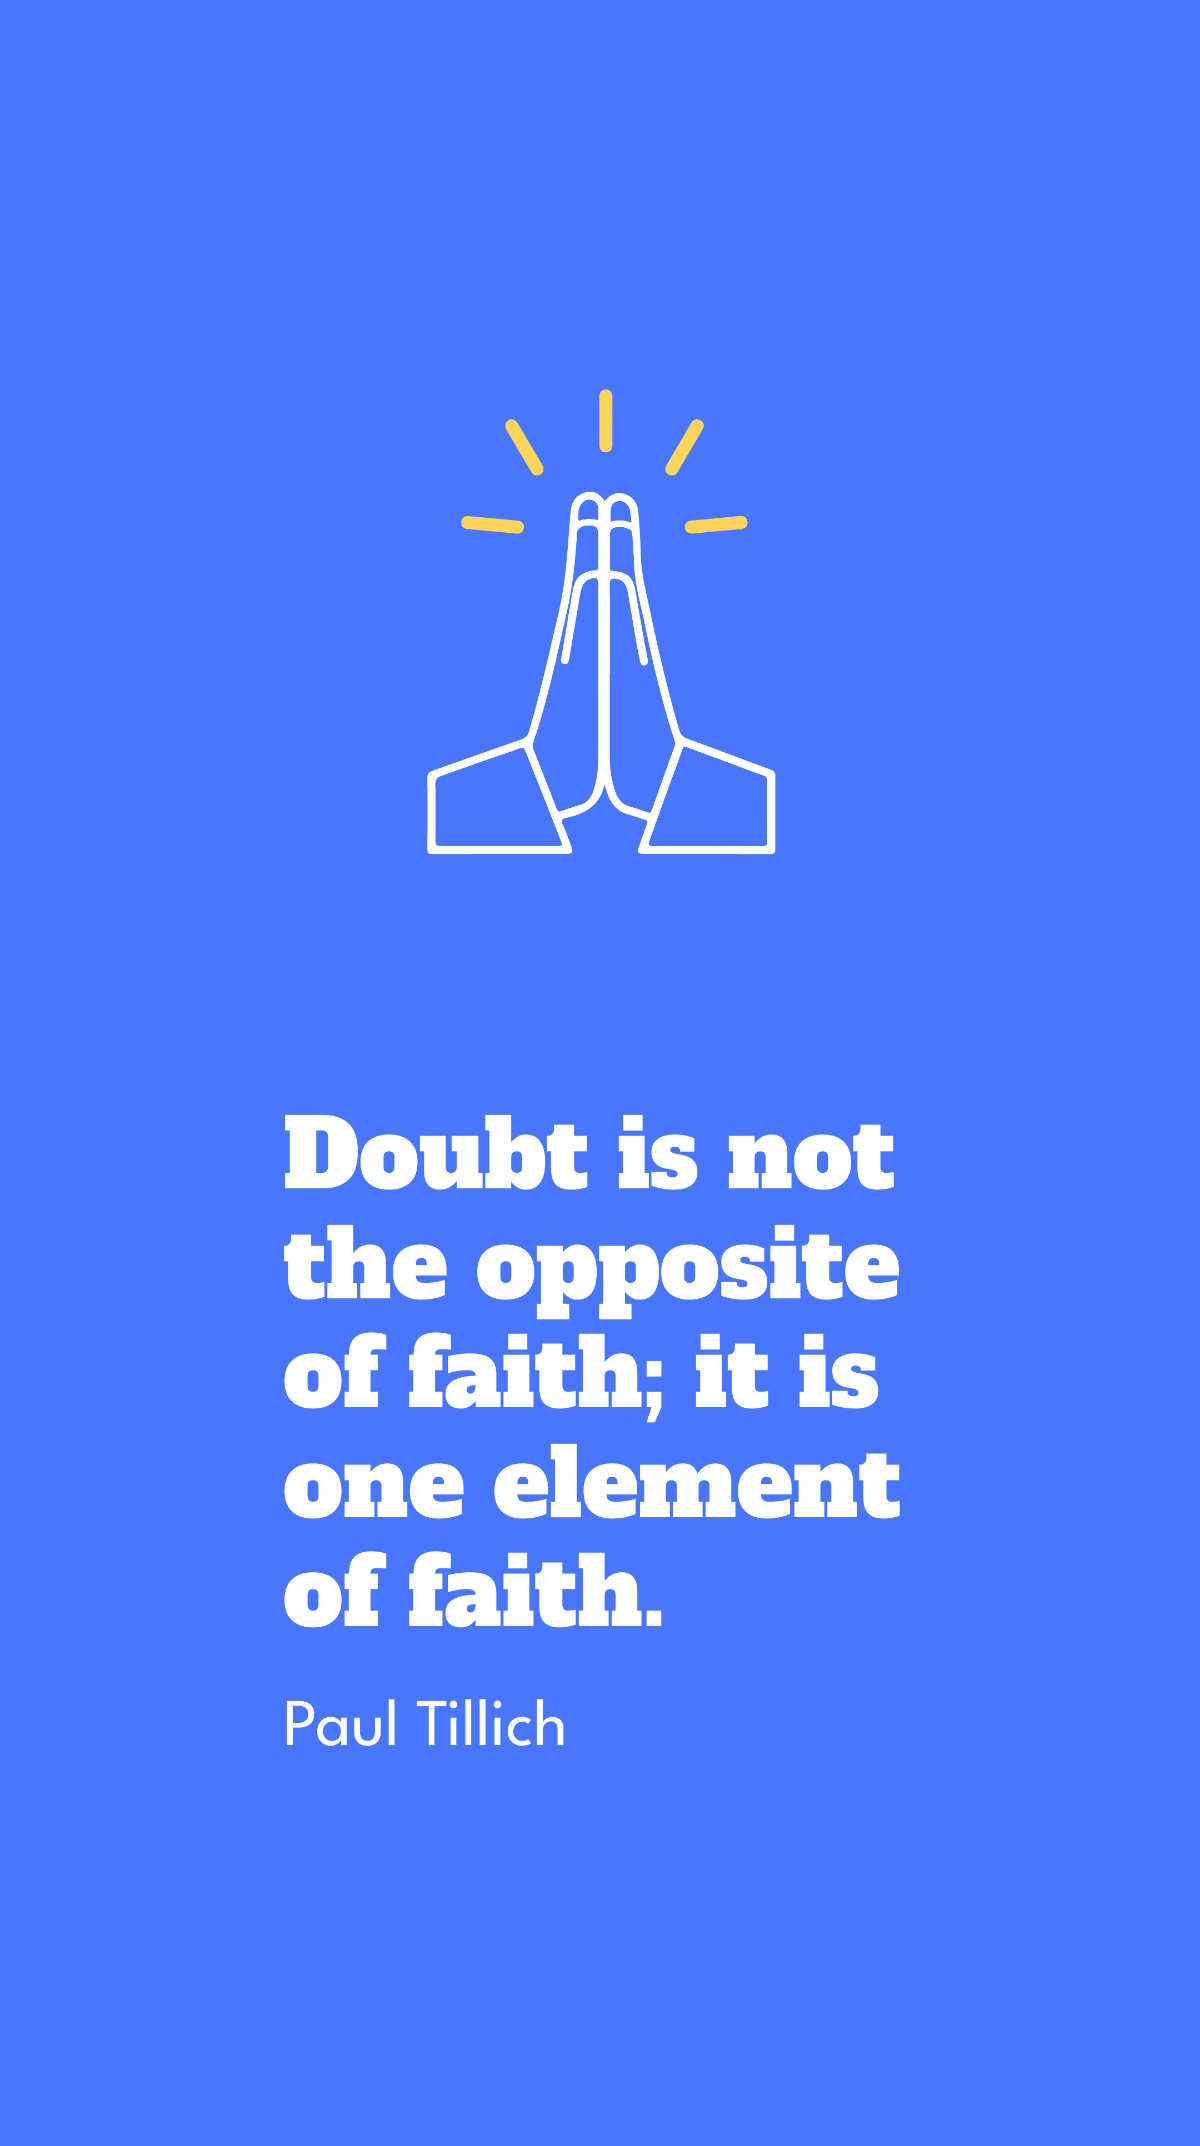 Paul Tillich - Doubt is not the opposite of faith; it is one element of faith. Template